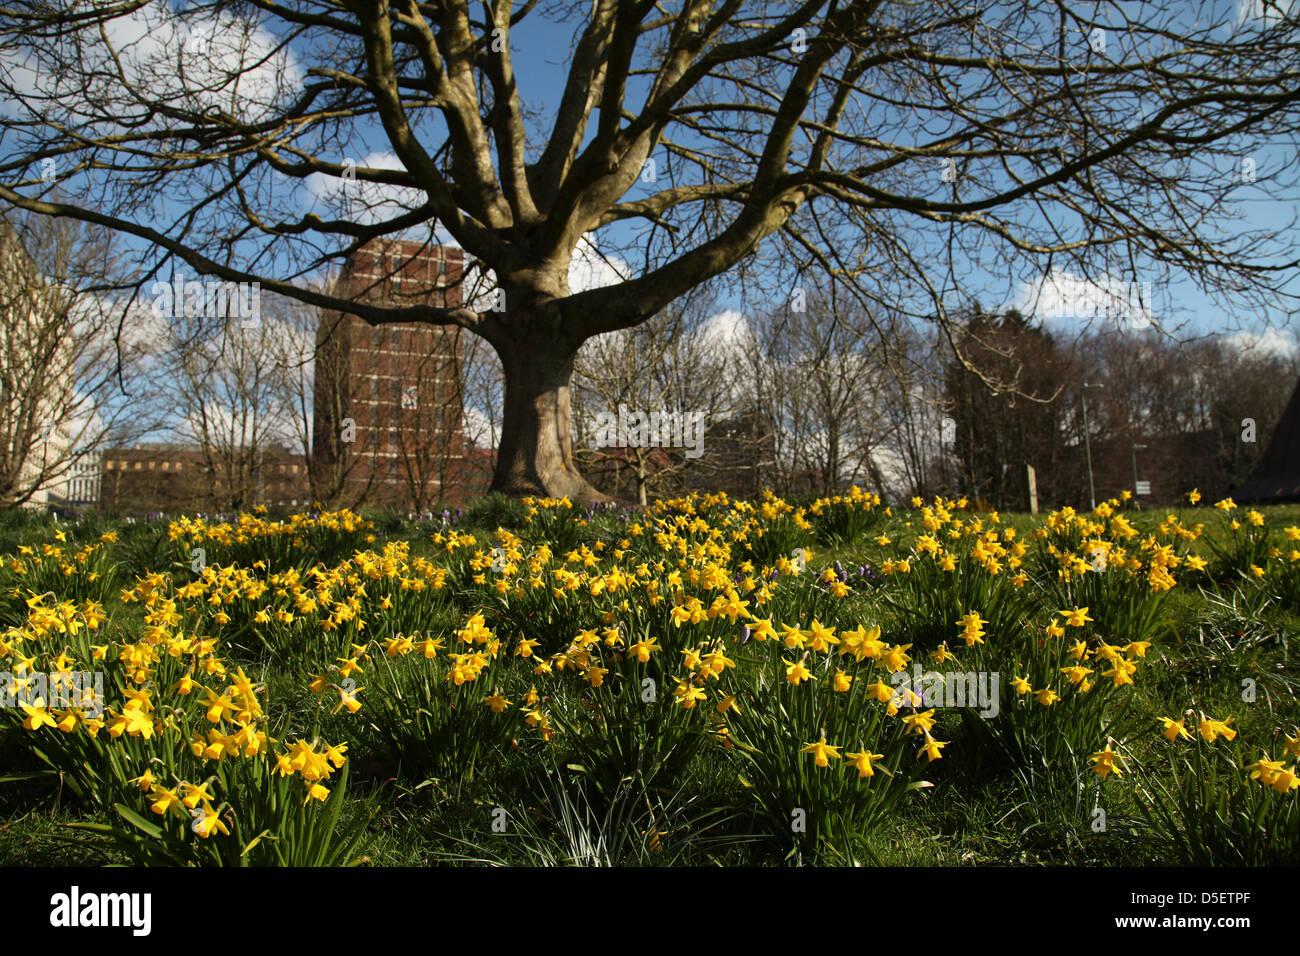 Basingstoke,UK. 31st March, 2013.  Daffodils blooming in Easter sunshine in Eastrop Park, Basingstoke on Easter Sunday. Cold March weather has delayed the start of Spring across the country. Credit: Rob Arnold/Alamy Live News Stock Photo